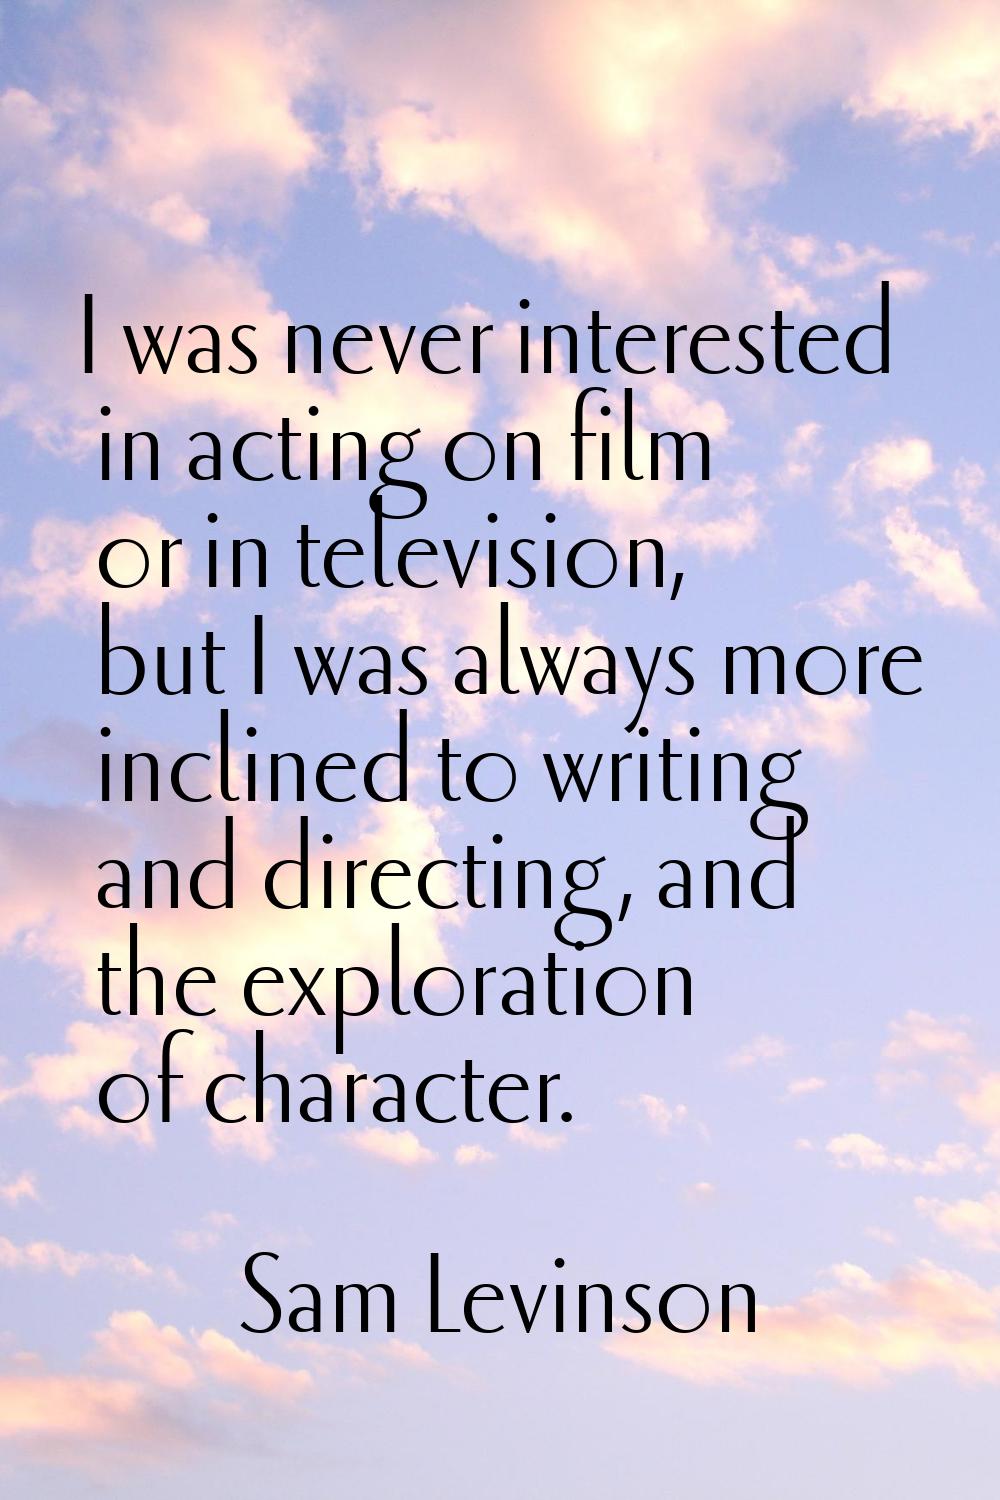 I was never interested in acting on film or in television, but I was always more inclined to writin